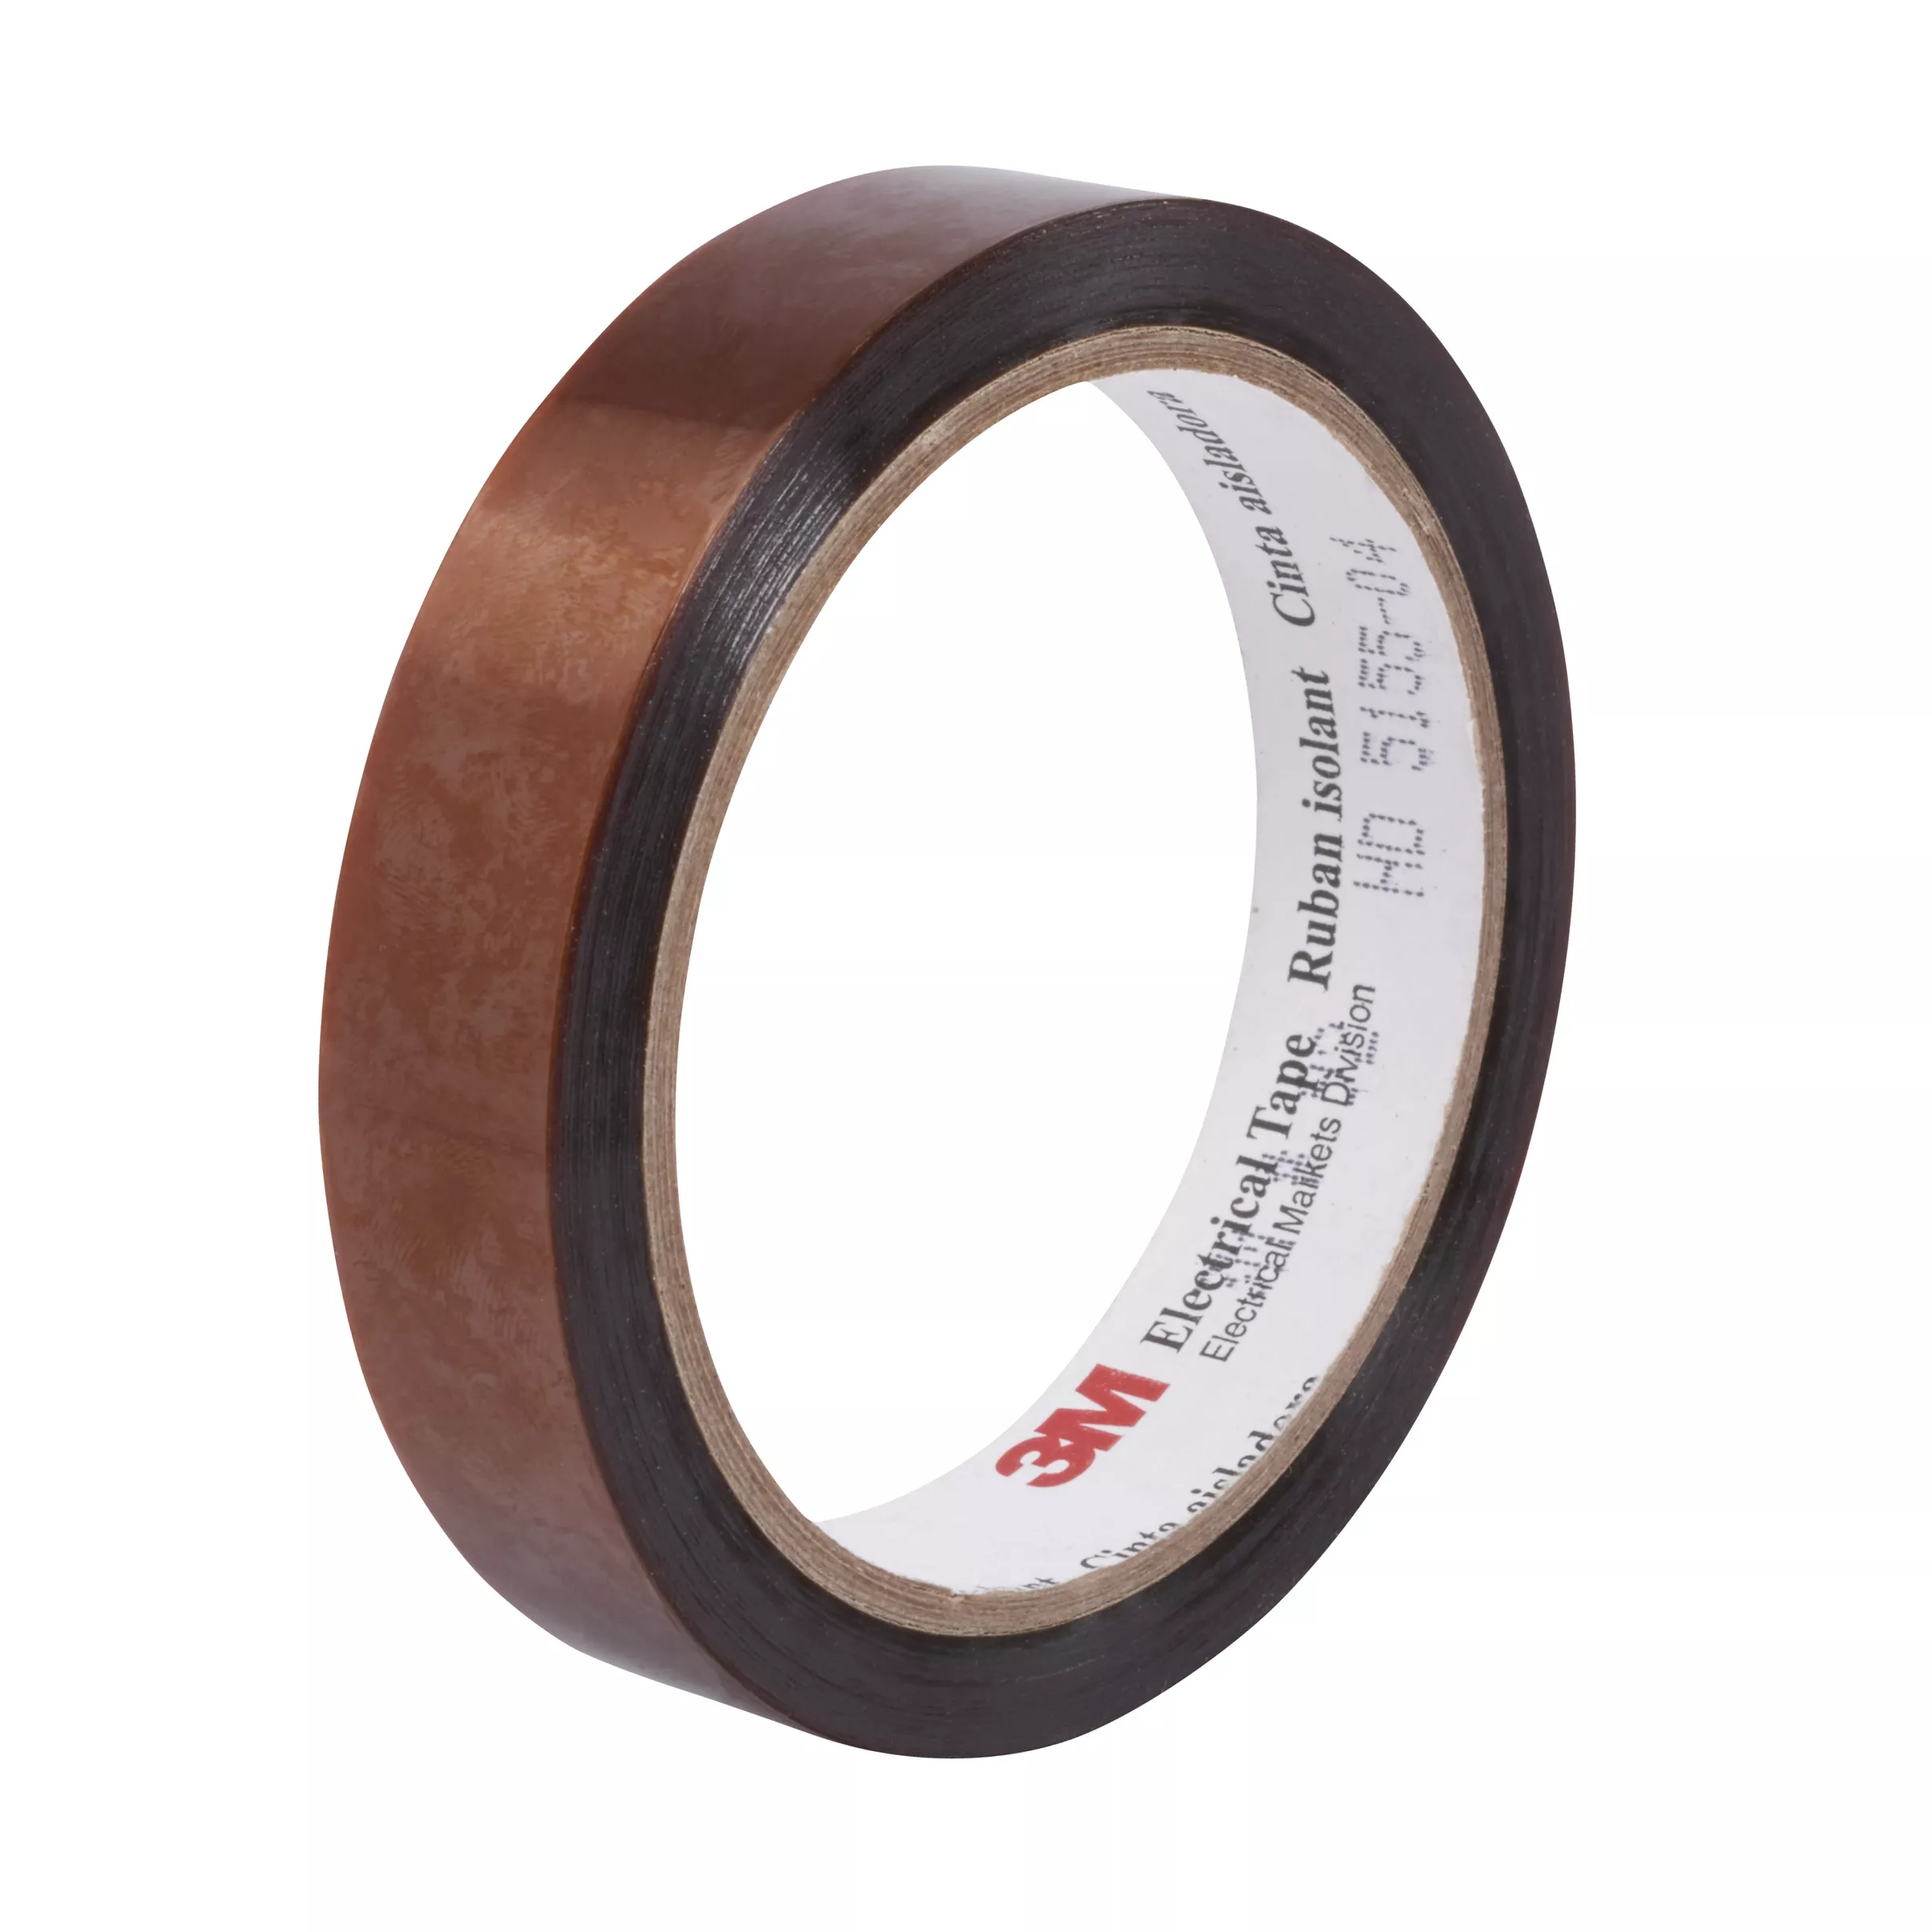 SKU 7010395797 | 3M™ Polyimide Film Electrical Tape 92